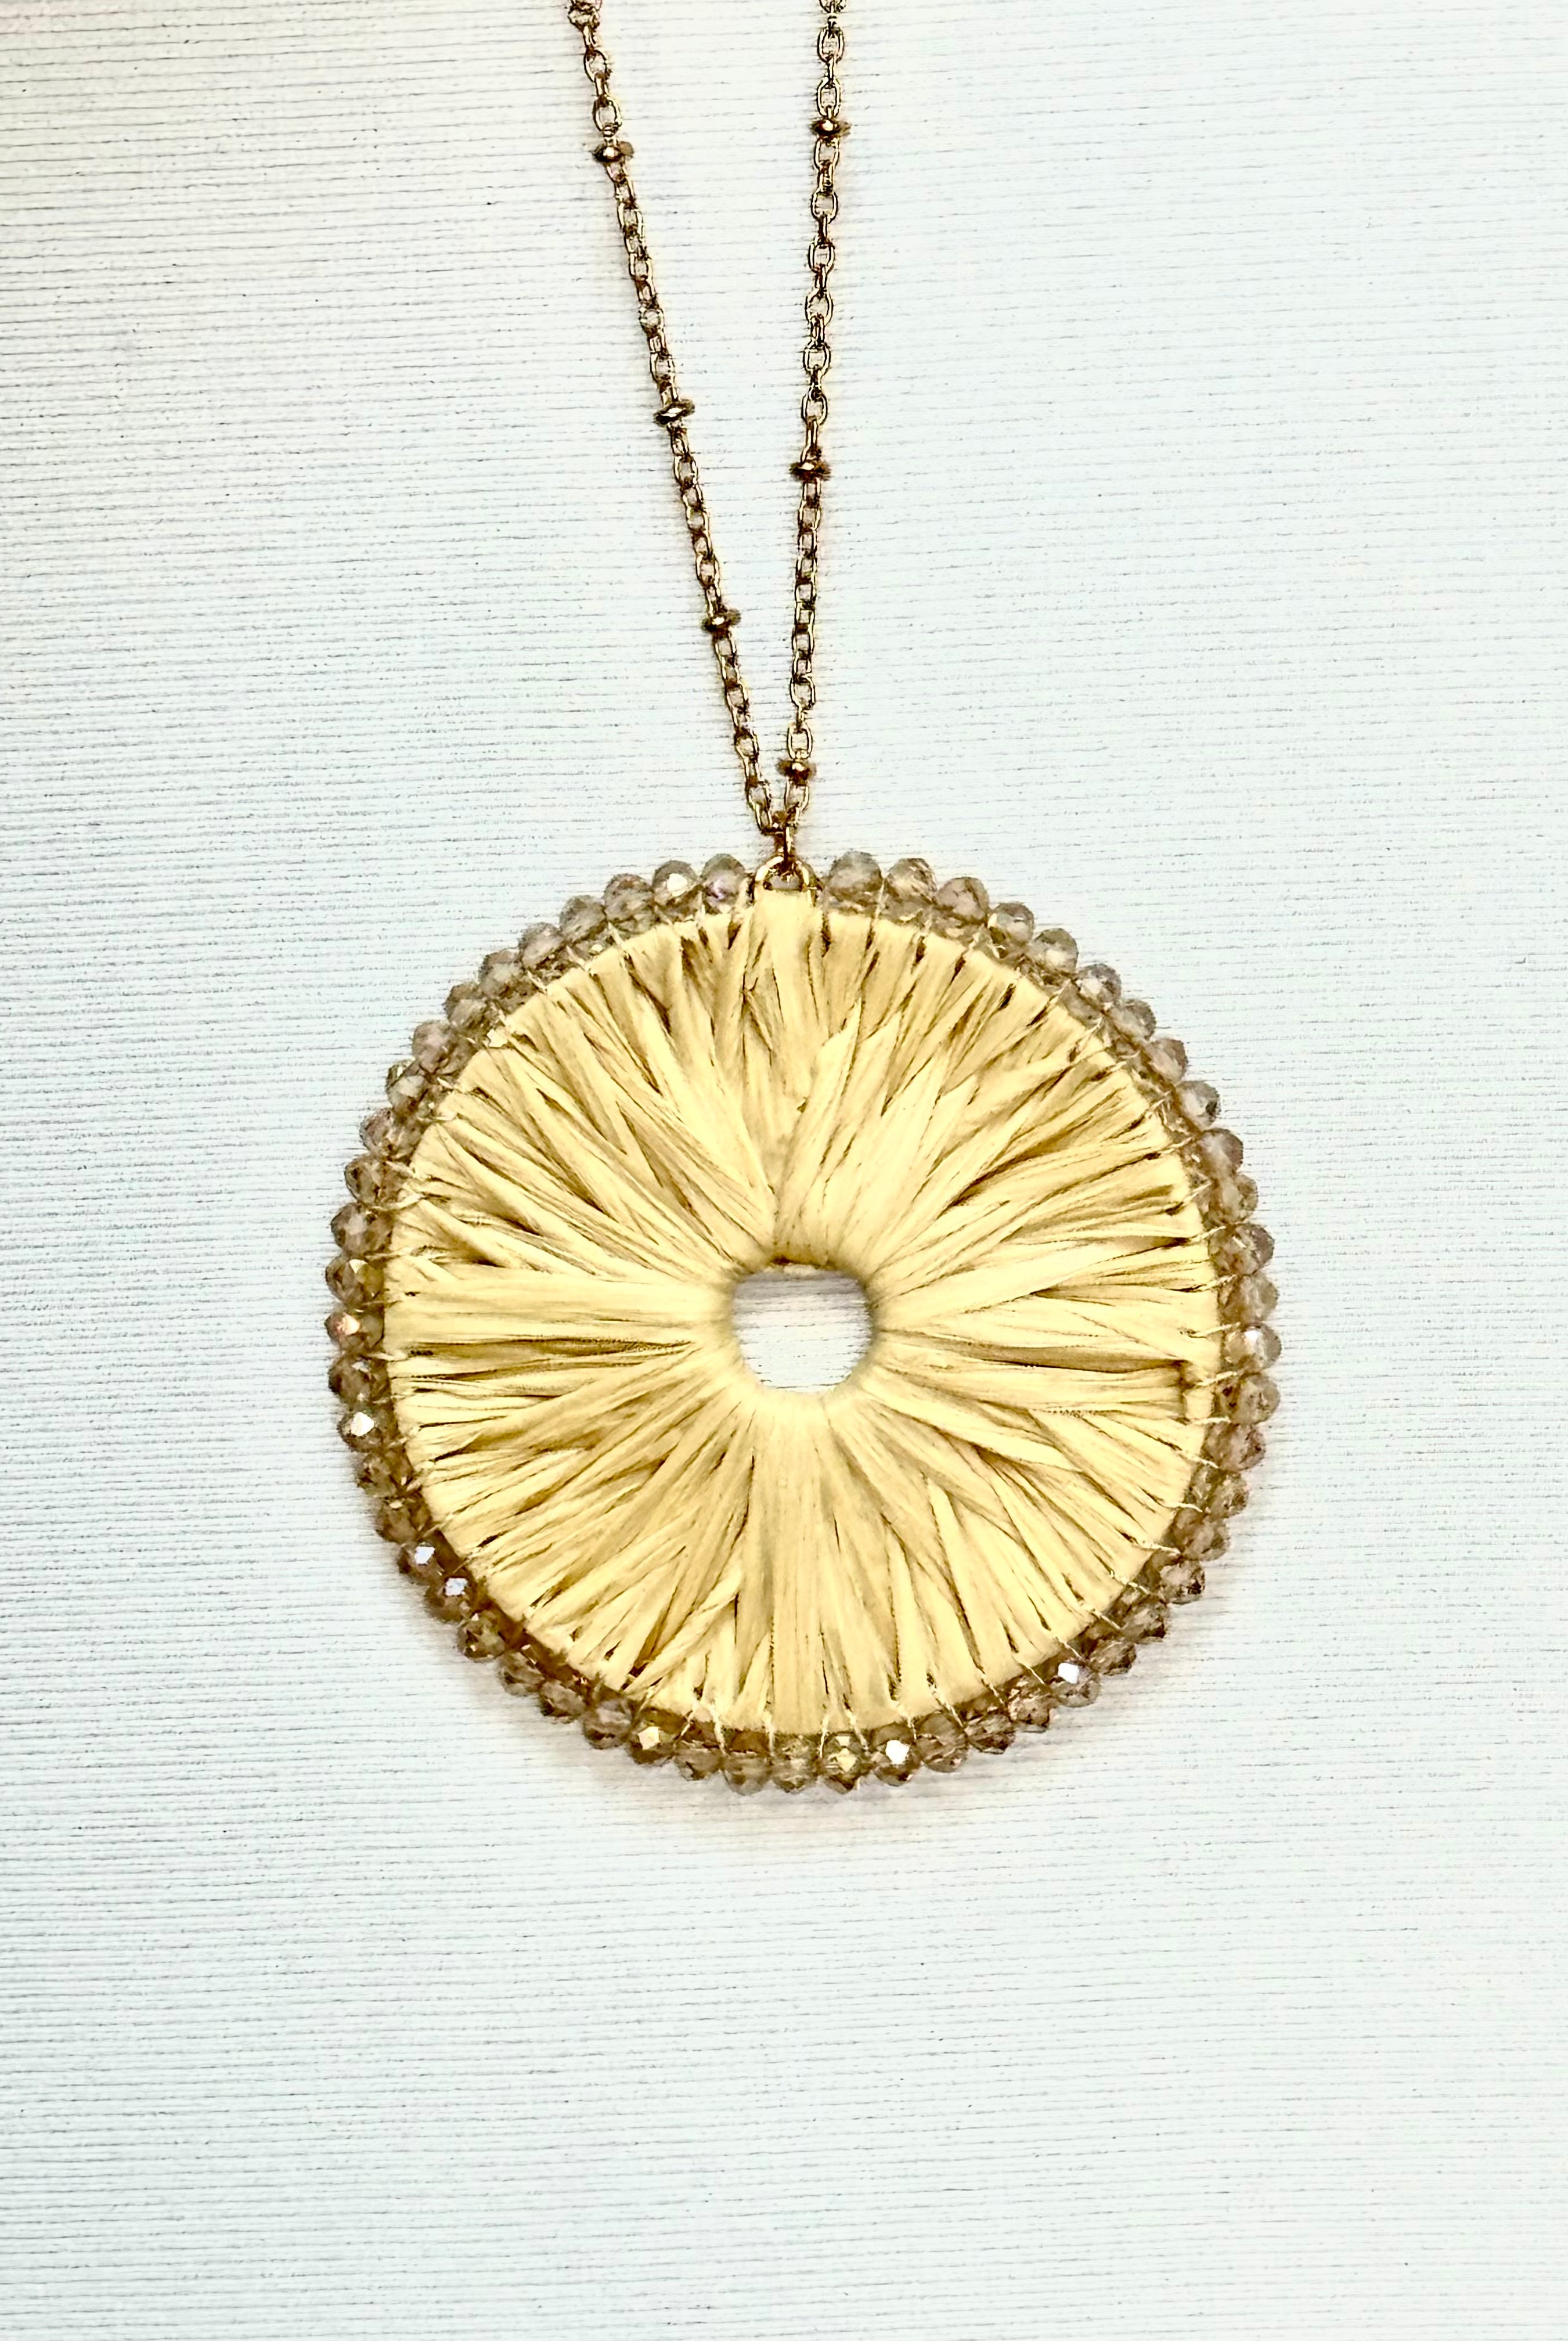 Raffia Medallion Necklace-Necklaces-The Lovely Closet-The Lovely Closet, Women's Fashion Boutique in Alexandria, KY